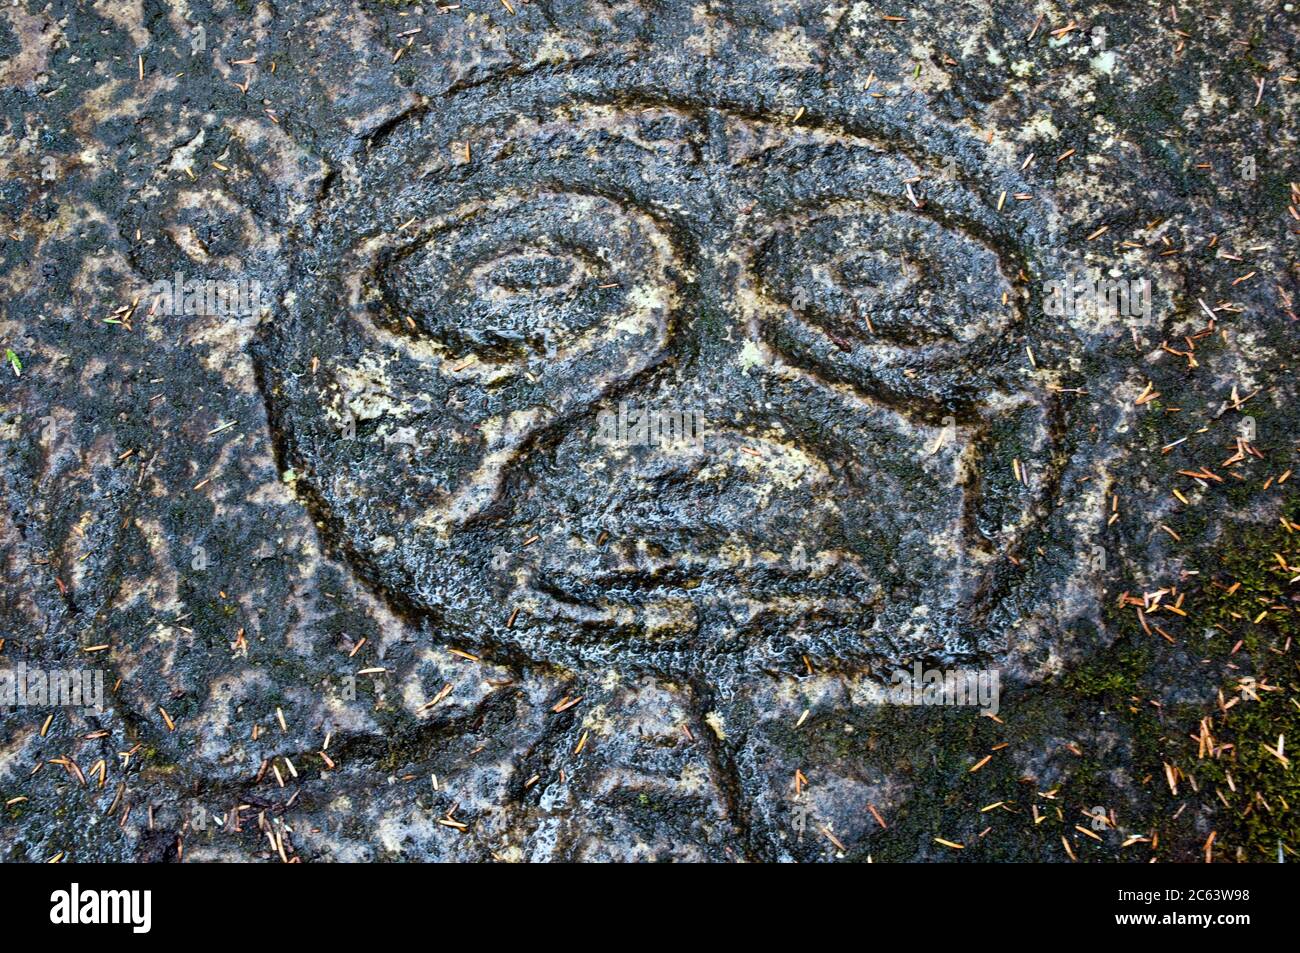 Ancient prehistoric petroglyph carved by indigenous First Nations people in the Great Bear Rainforest region, Bella Coola, British Columbia, Canada. Stock Photo